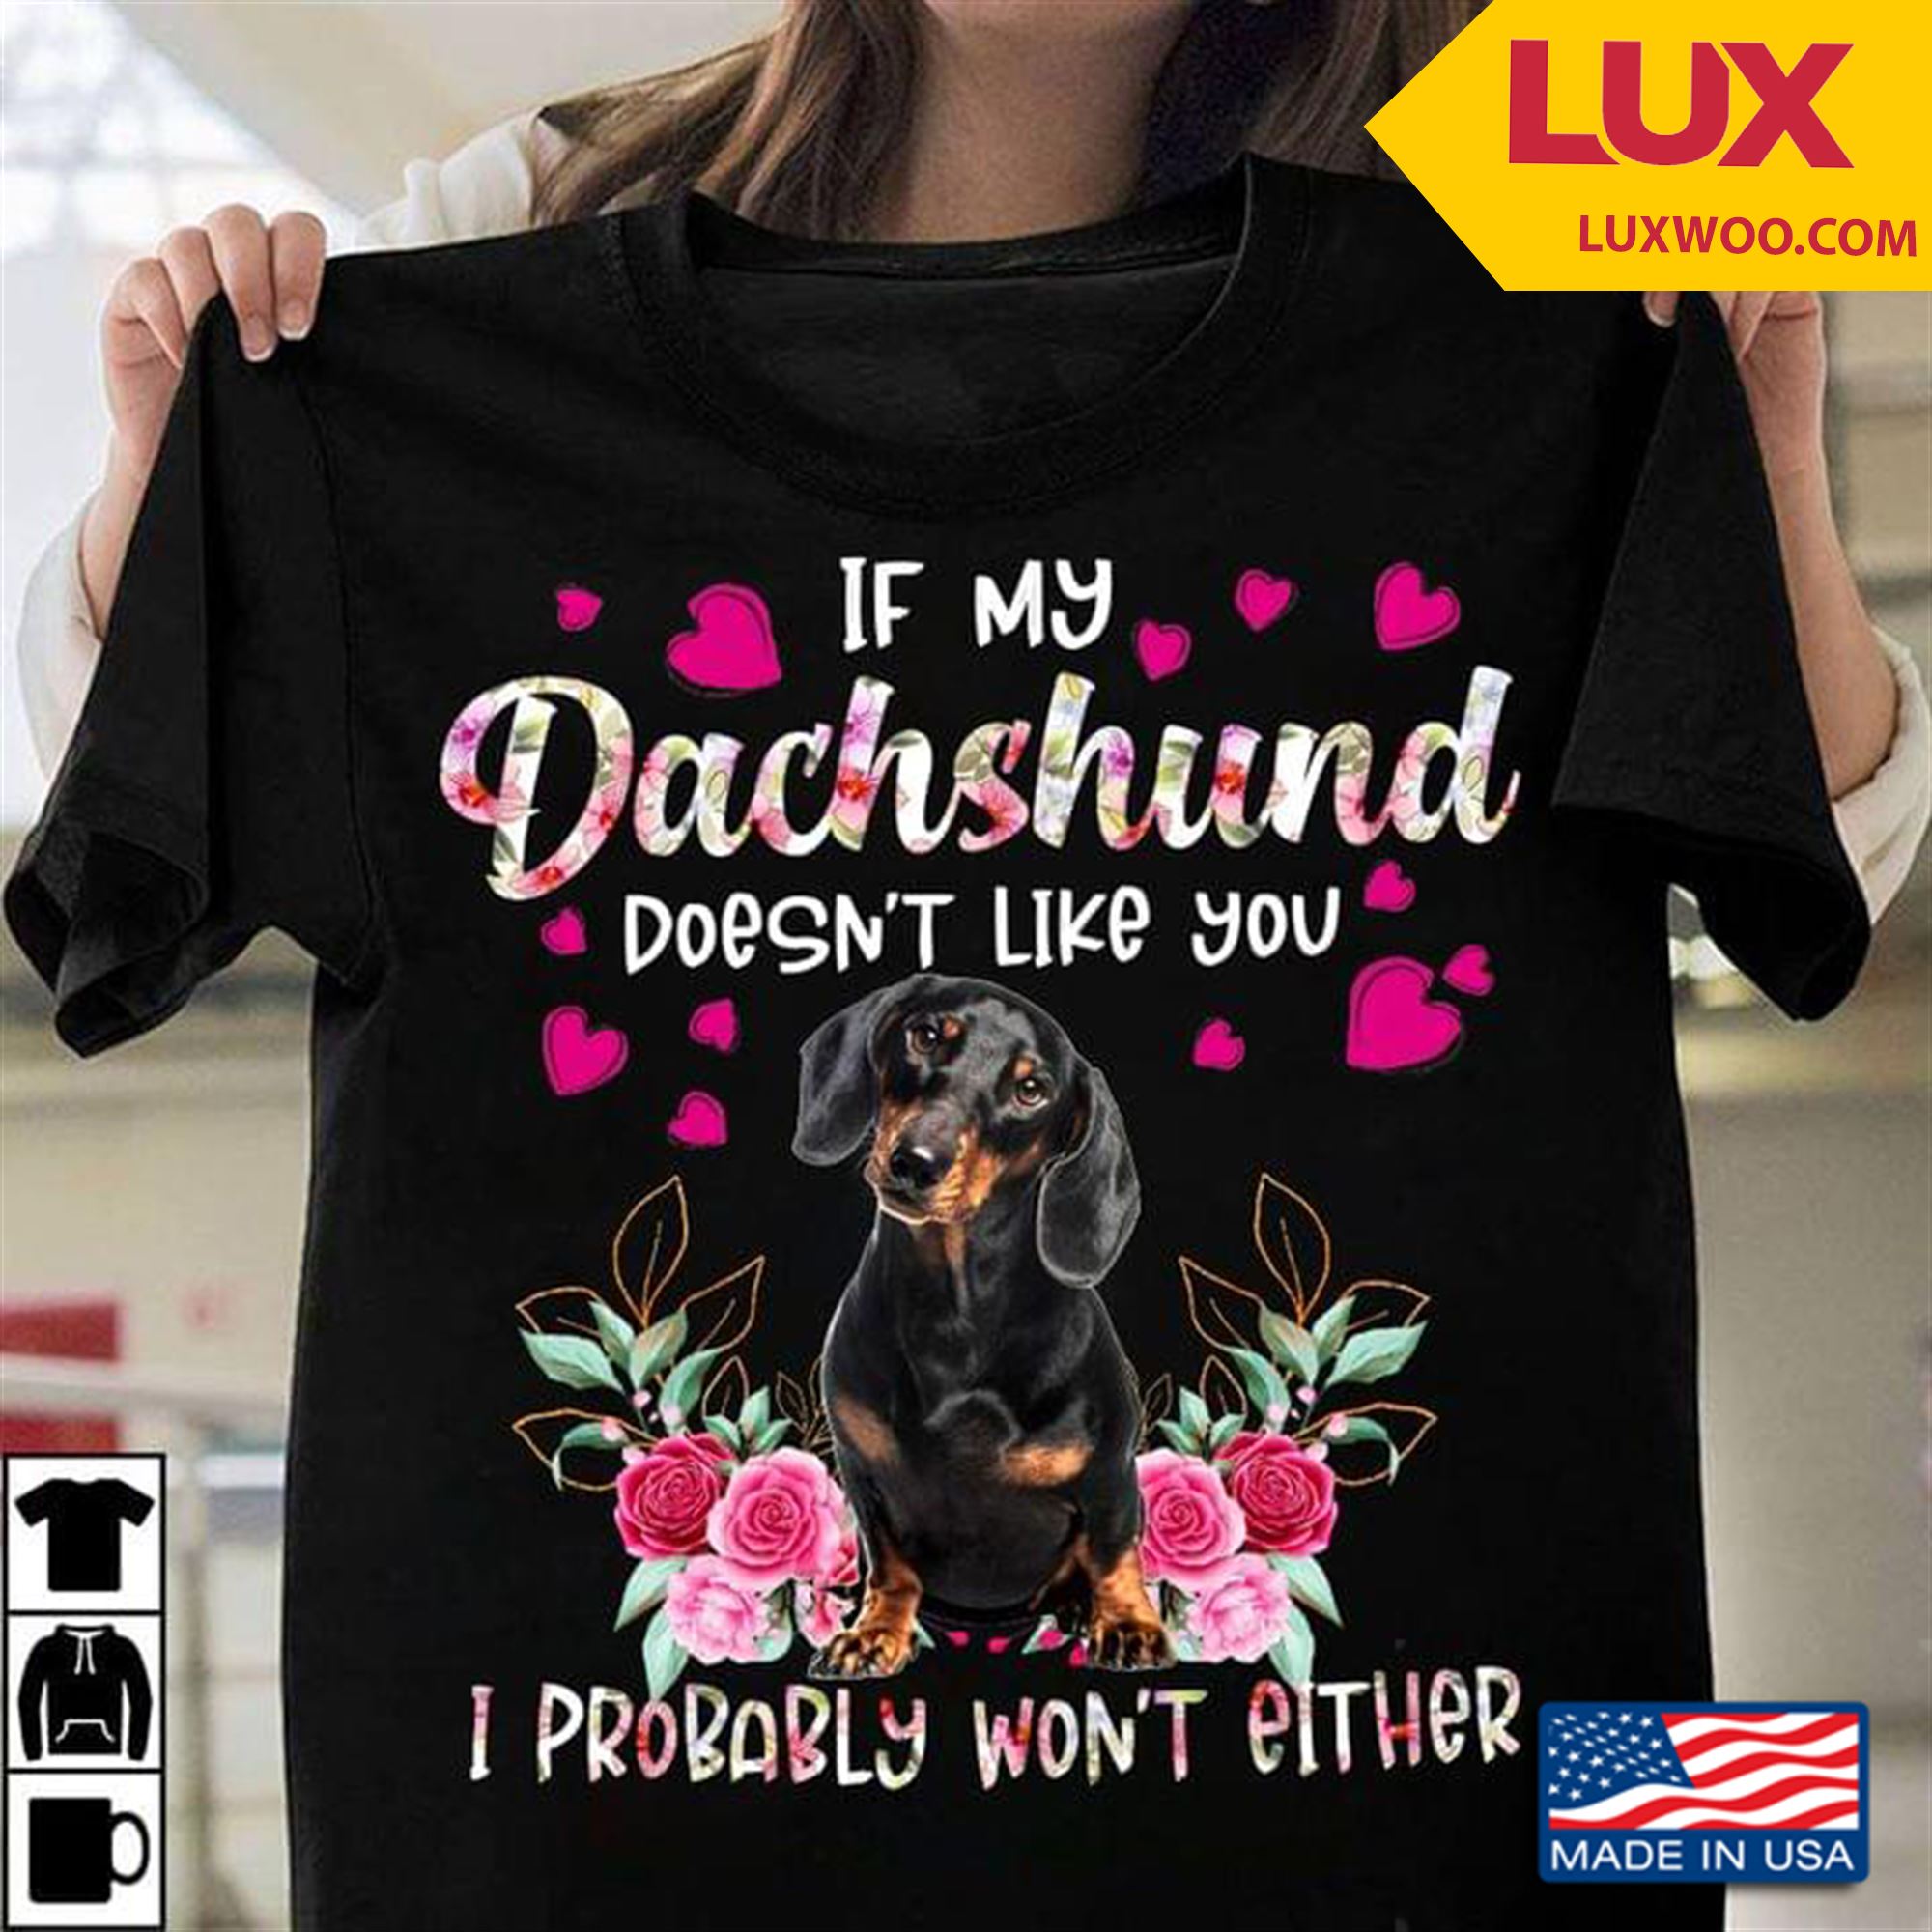 If My Dachshund Doesnt Like You I Probably Wont Either Tshirt Size Up To 5xl